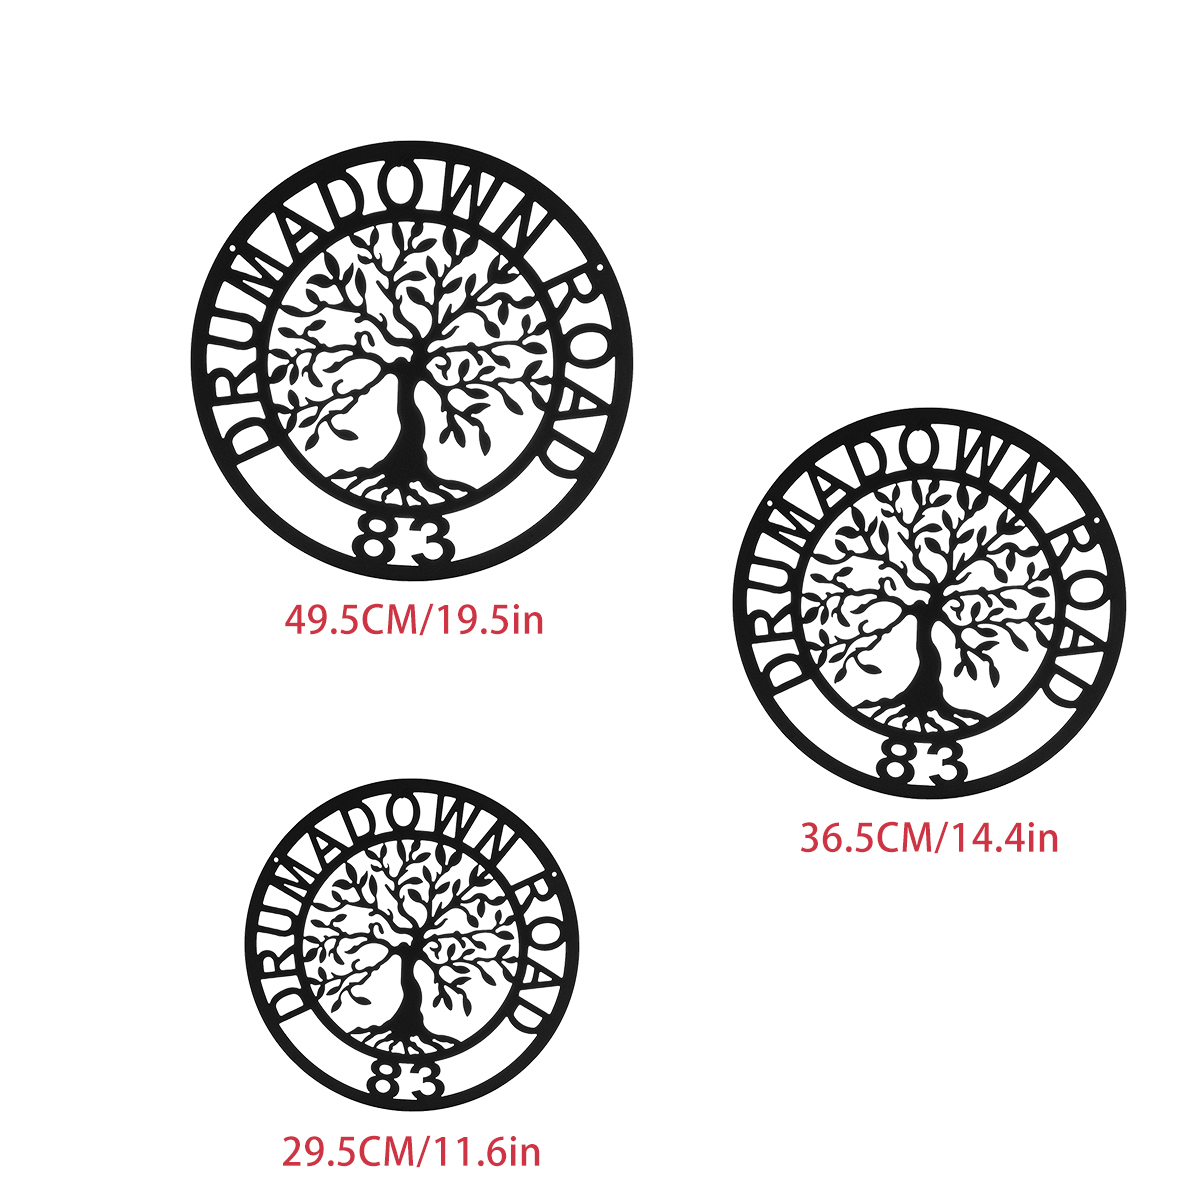 Metal-Round-Tree-of-Life-Wall-Art-Peronsalised-Wall-Decorations-for-Home-Office-Living-Room-Fashion--1764917-7